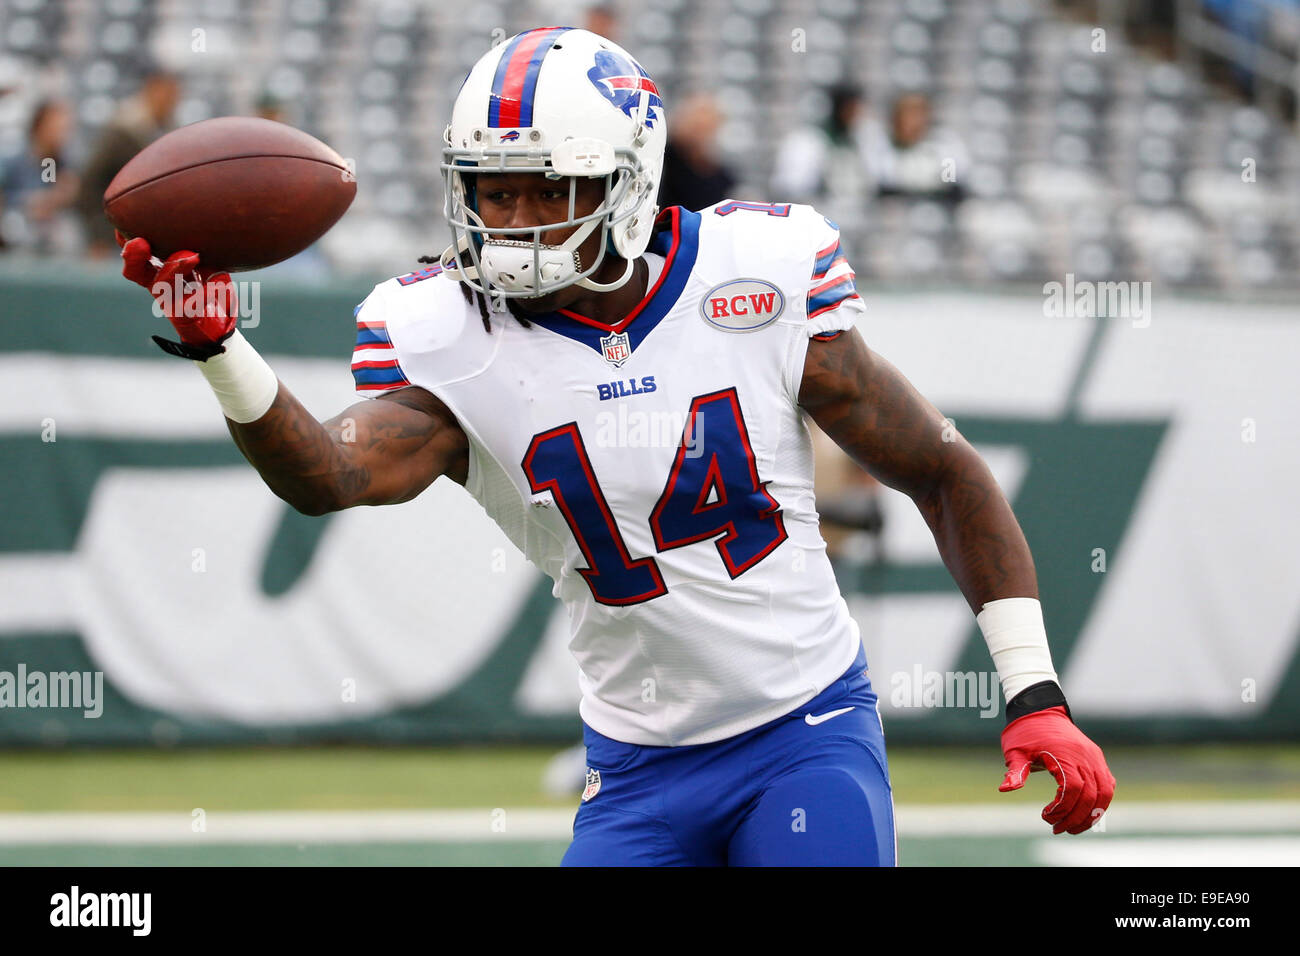 East Rutherford, Jersey, USA. 26th Oct, 2014. Buffalo Bills wide receiver Sammy (14) makes the one handed catch during warm-ups prior to the NFL game between the Buffalo